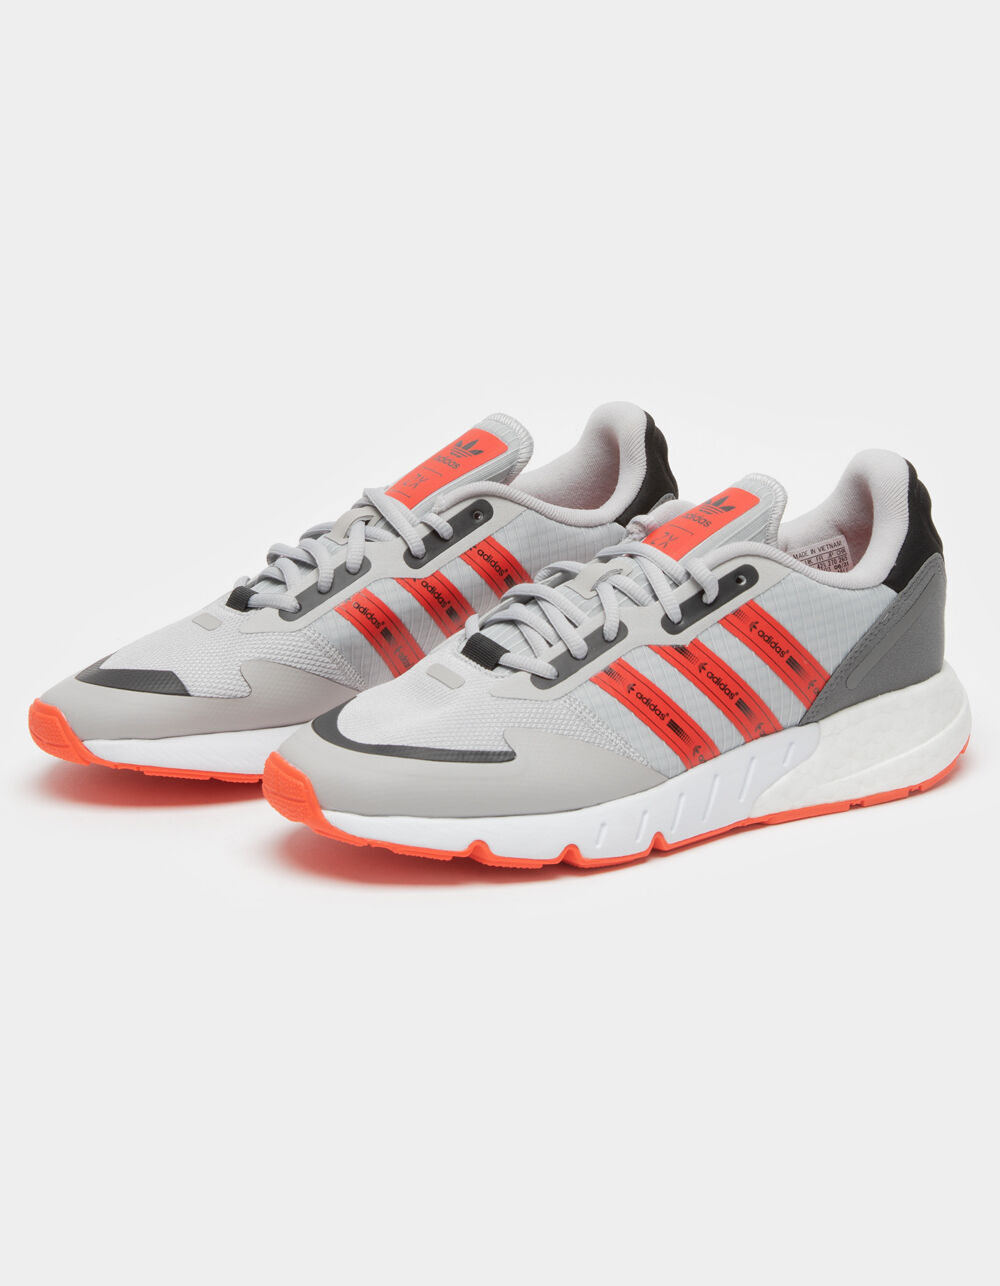 ADIDAS ZX 1K Boost Shoes